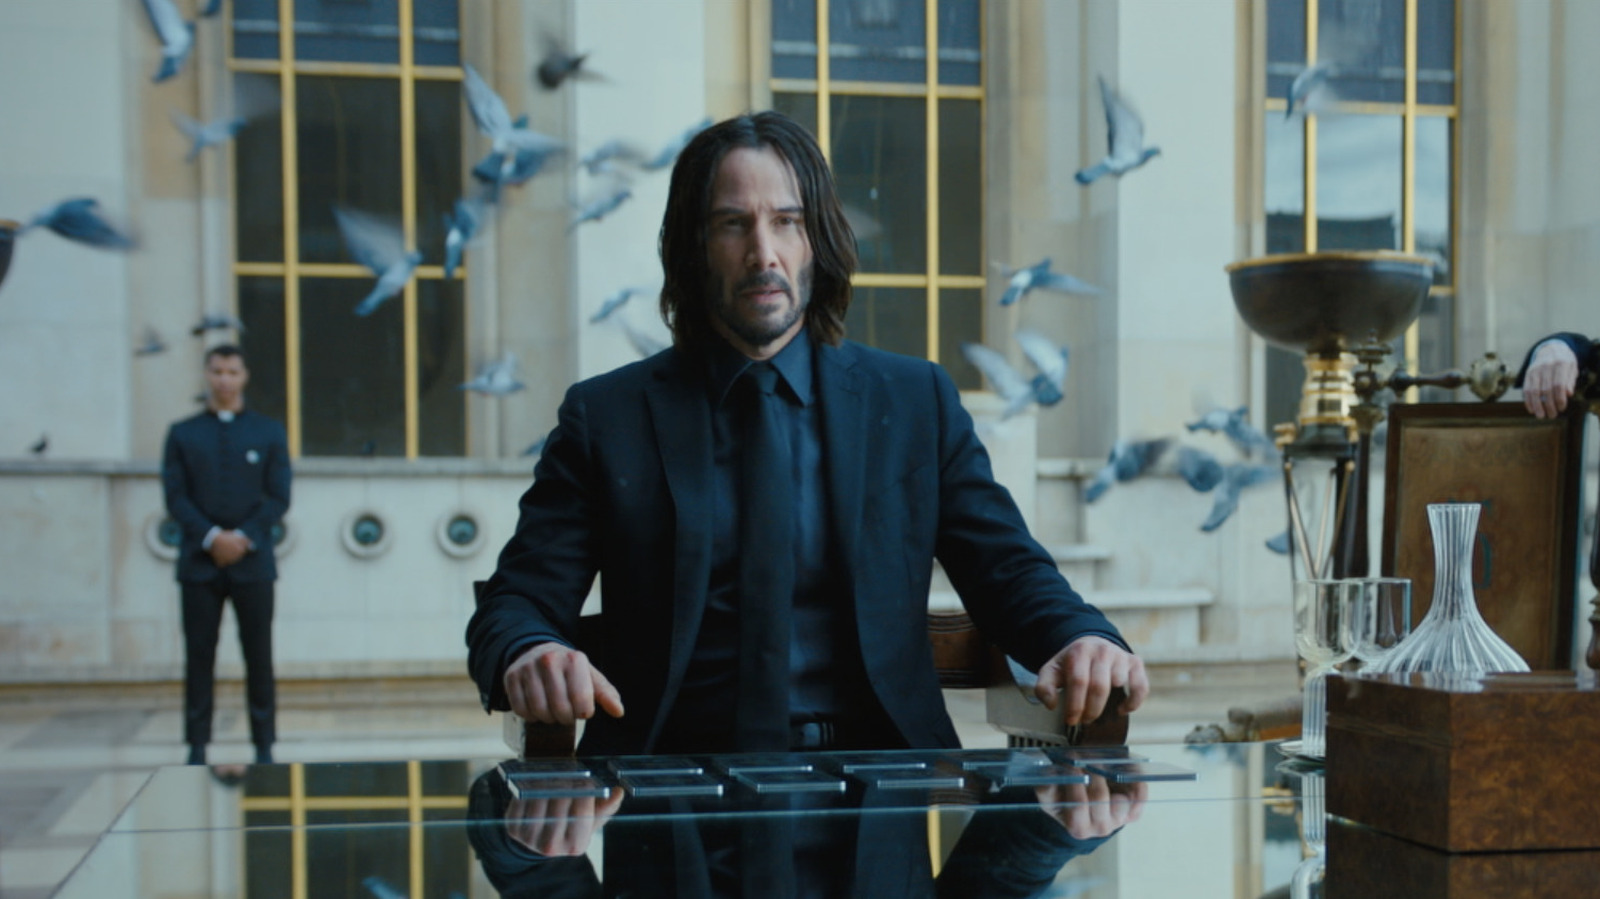 REVIEW: 'John Wick: Chapter 4' raises the bar on stunts, action